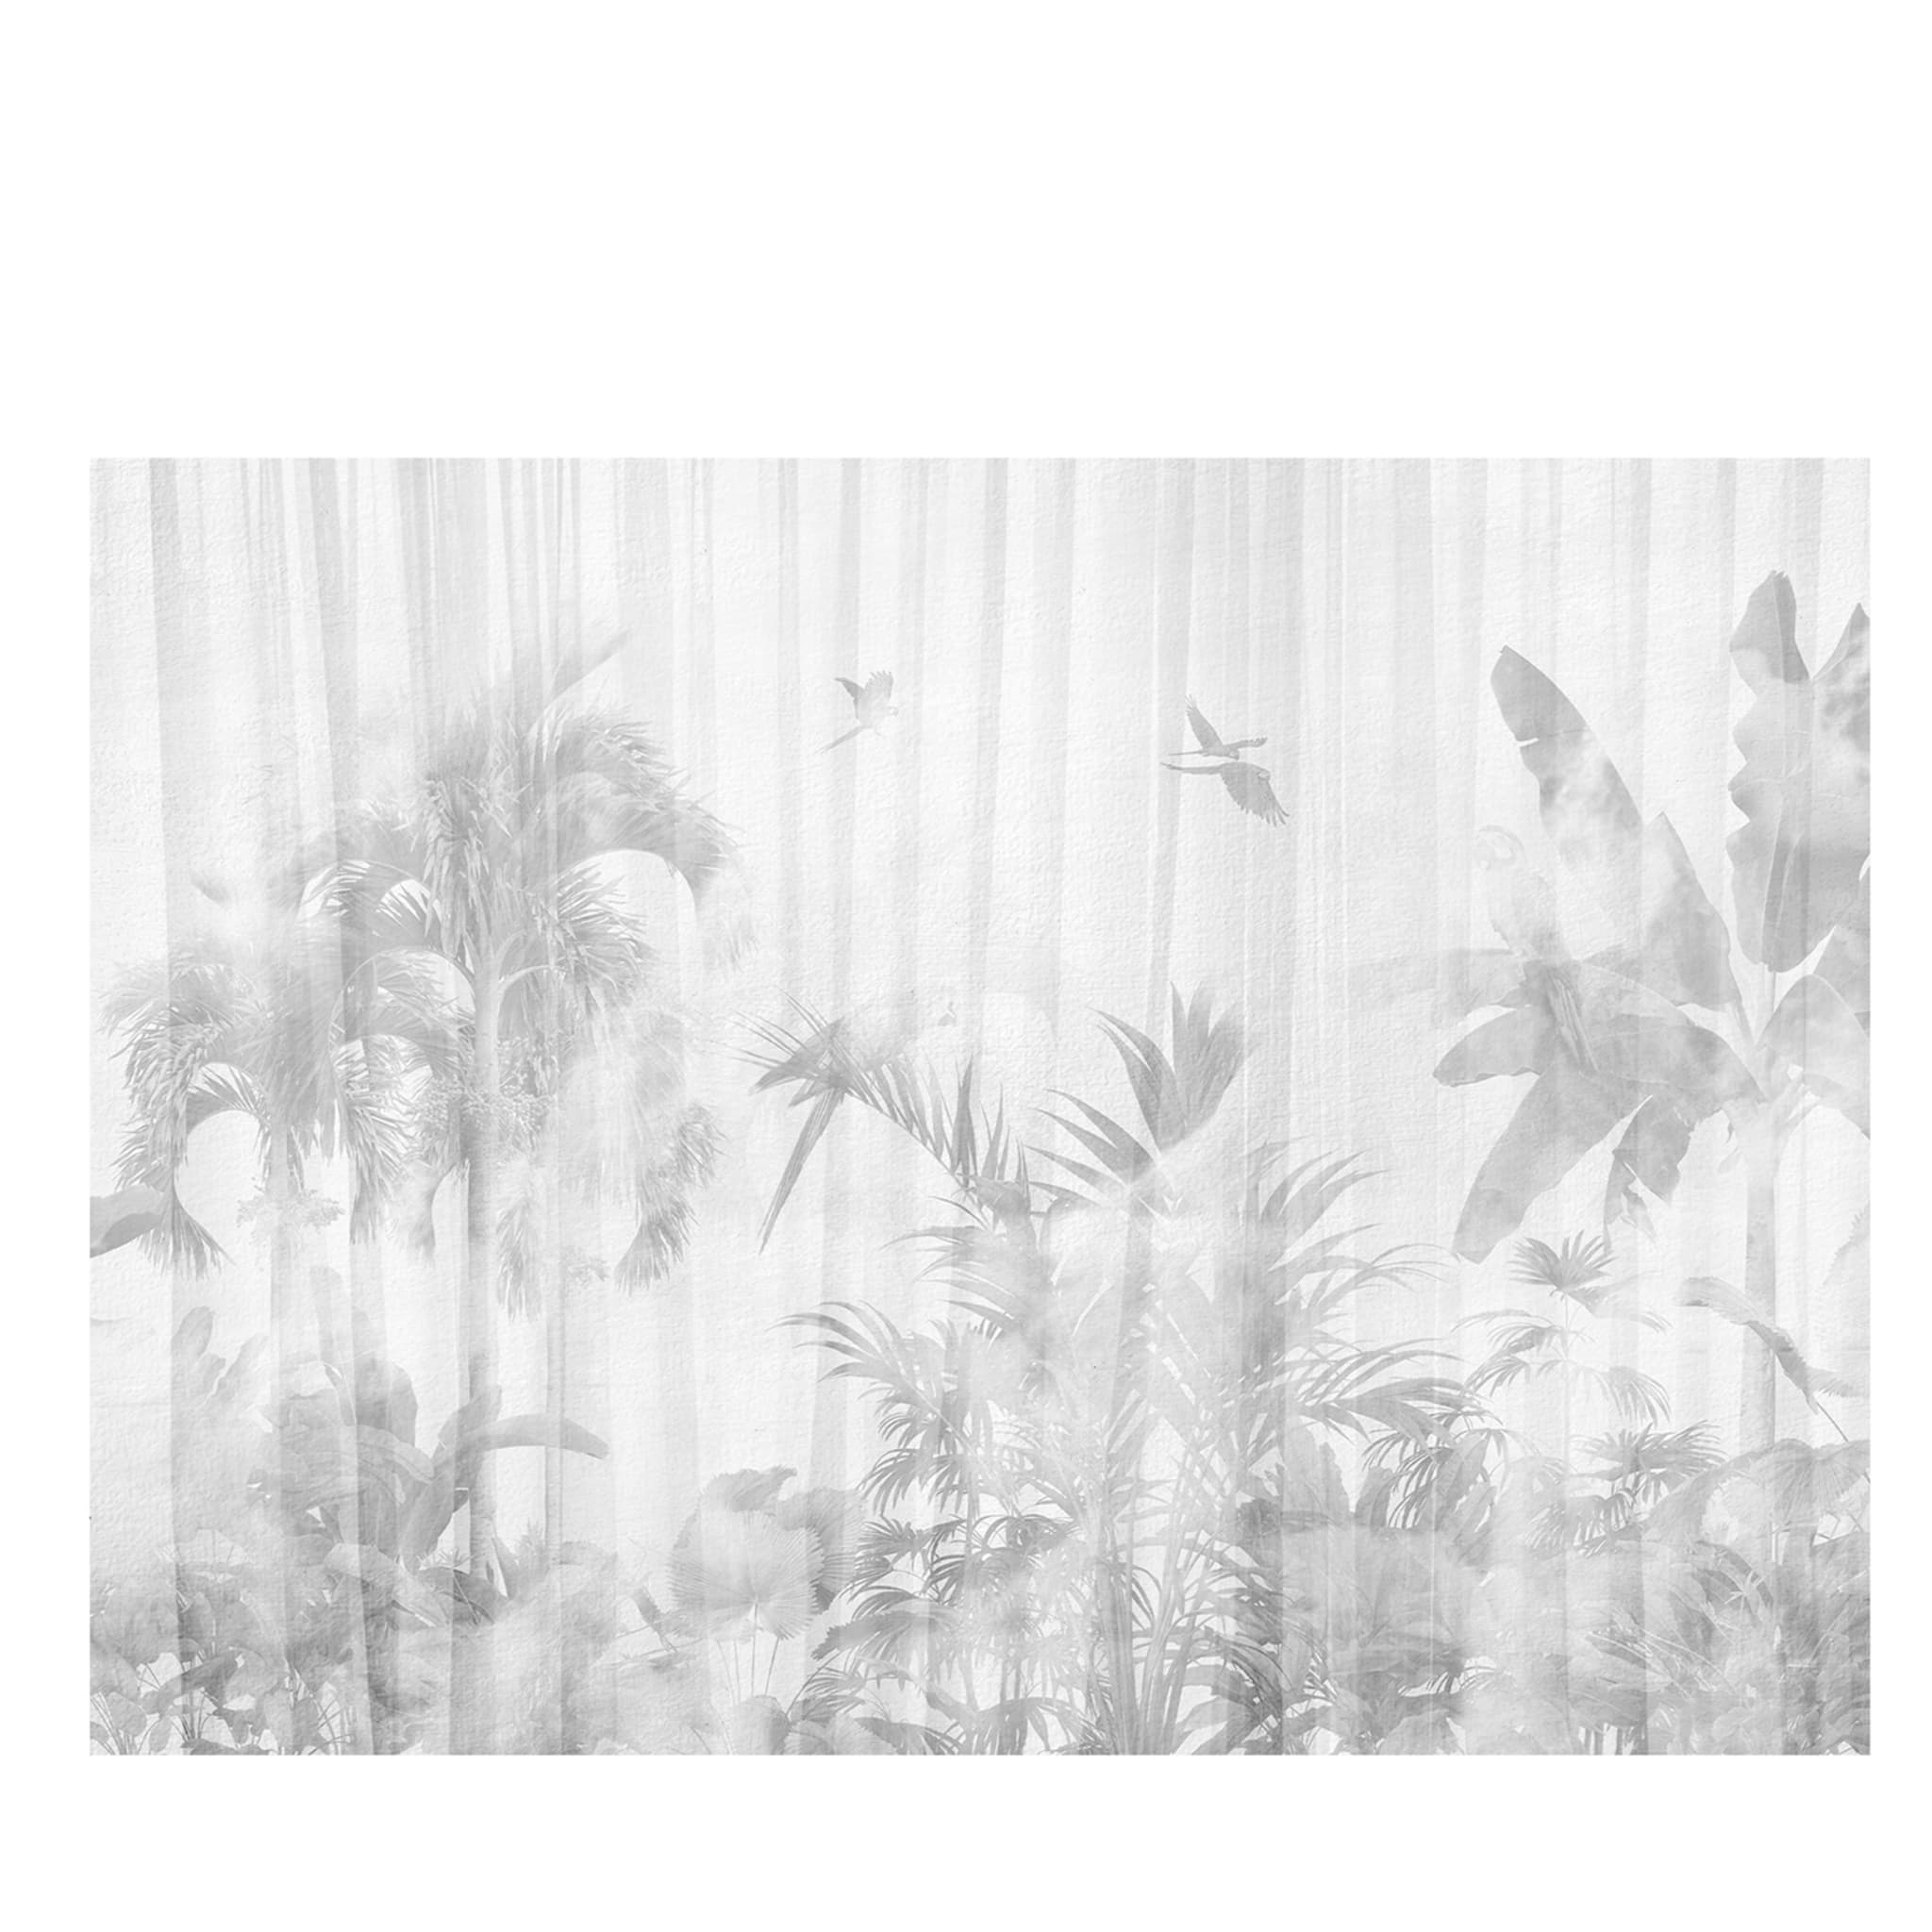 B&W flying parrots textured wallpaper - Main view